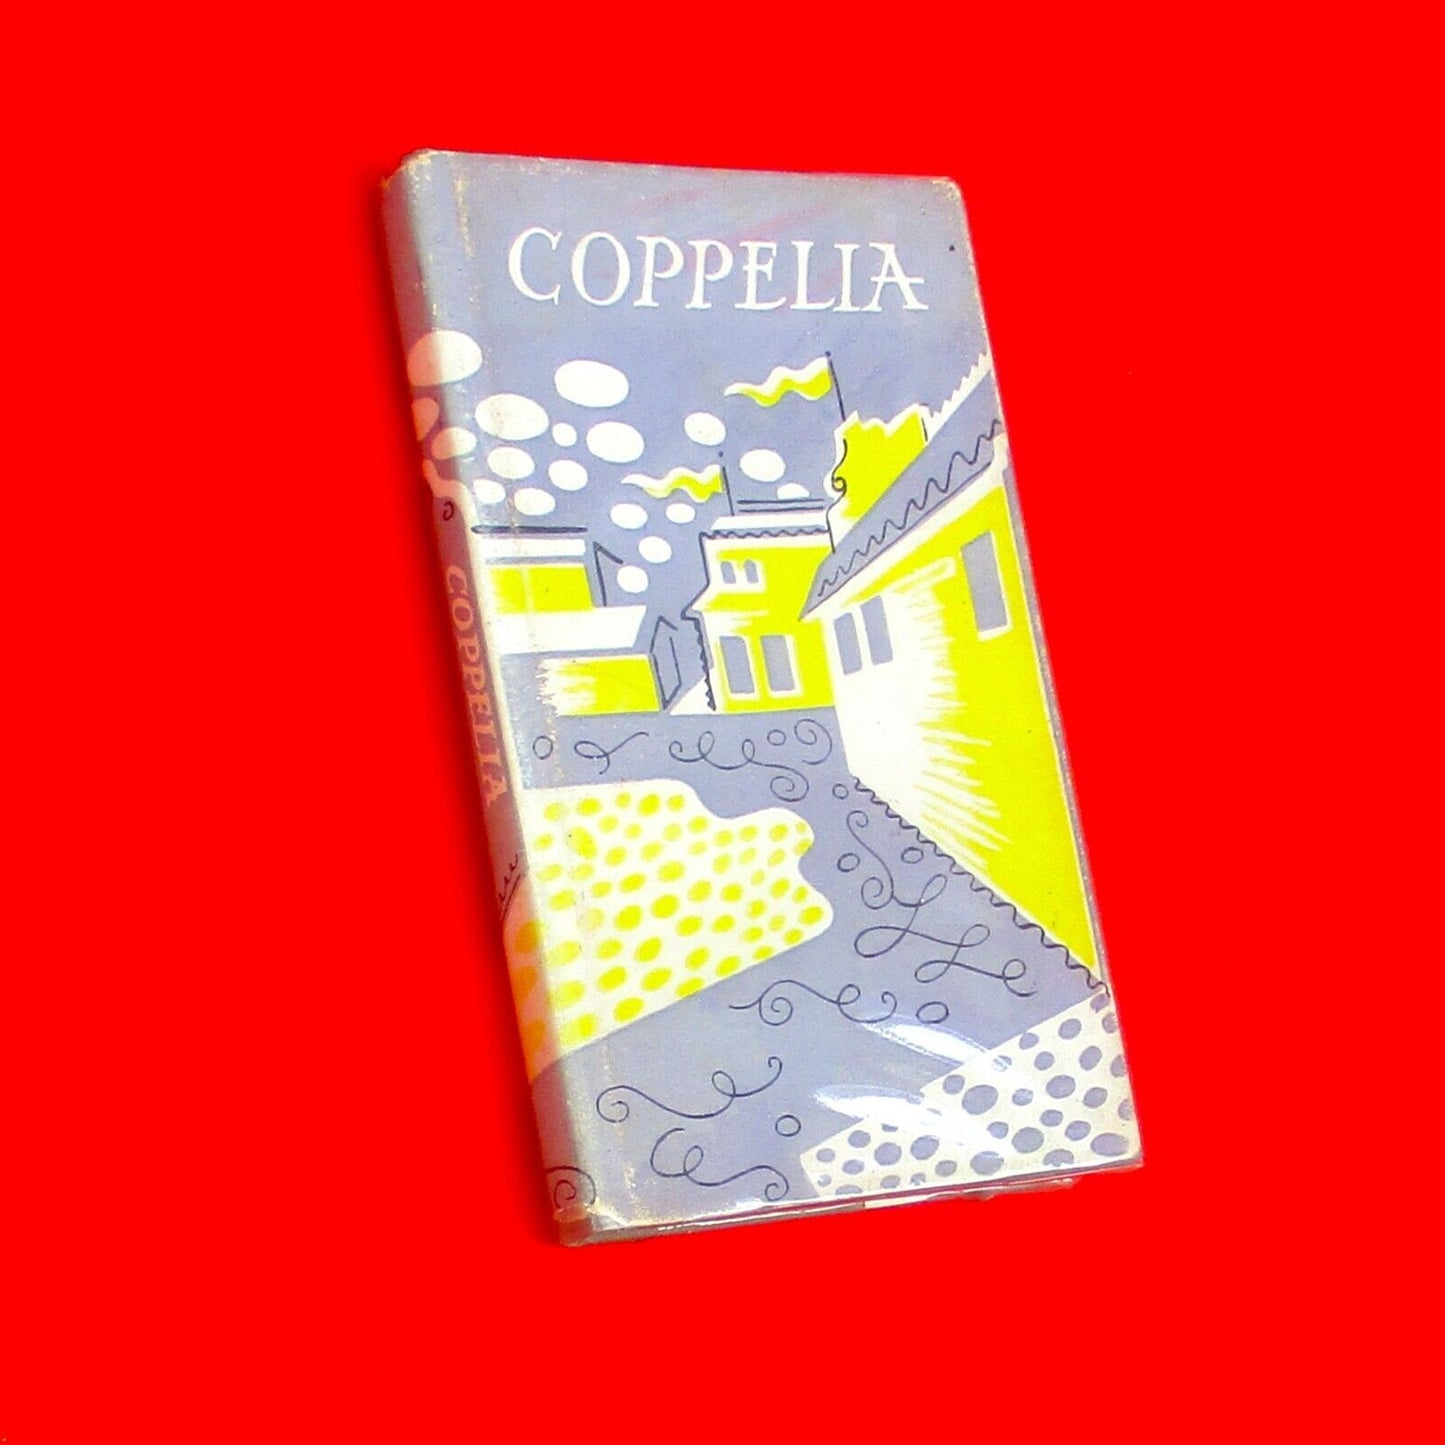 Coppelia The Story of The Ballet by Sandy Posner 1953 Hardback Adam & Charles